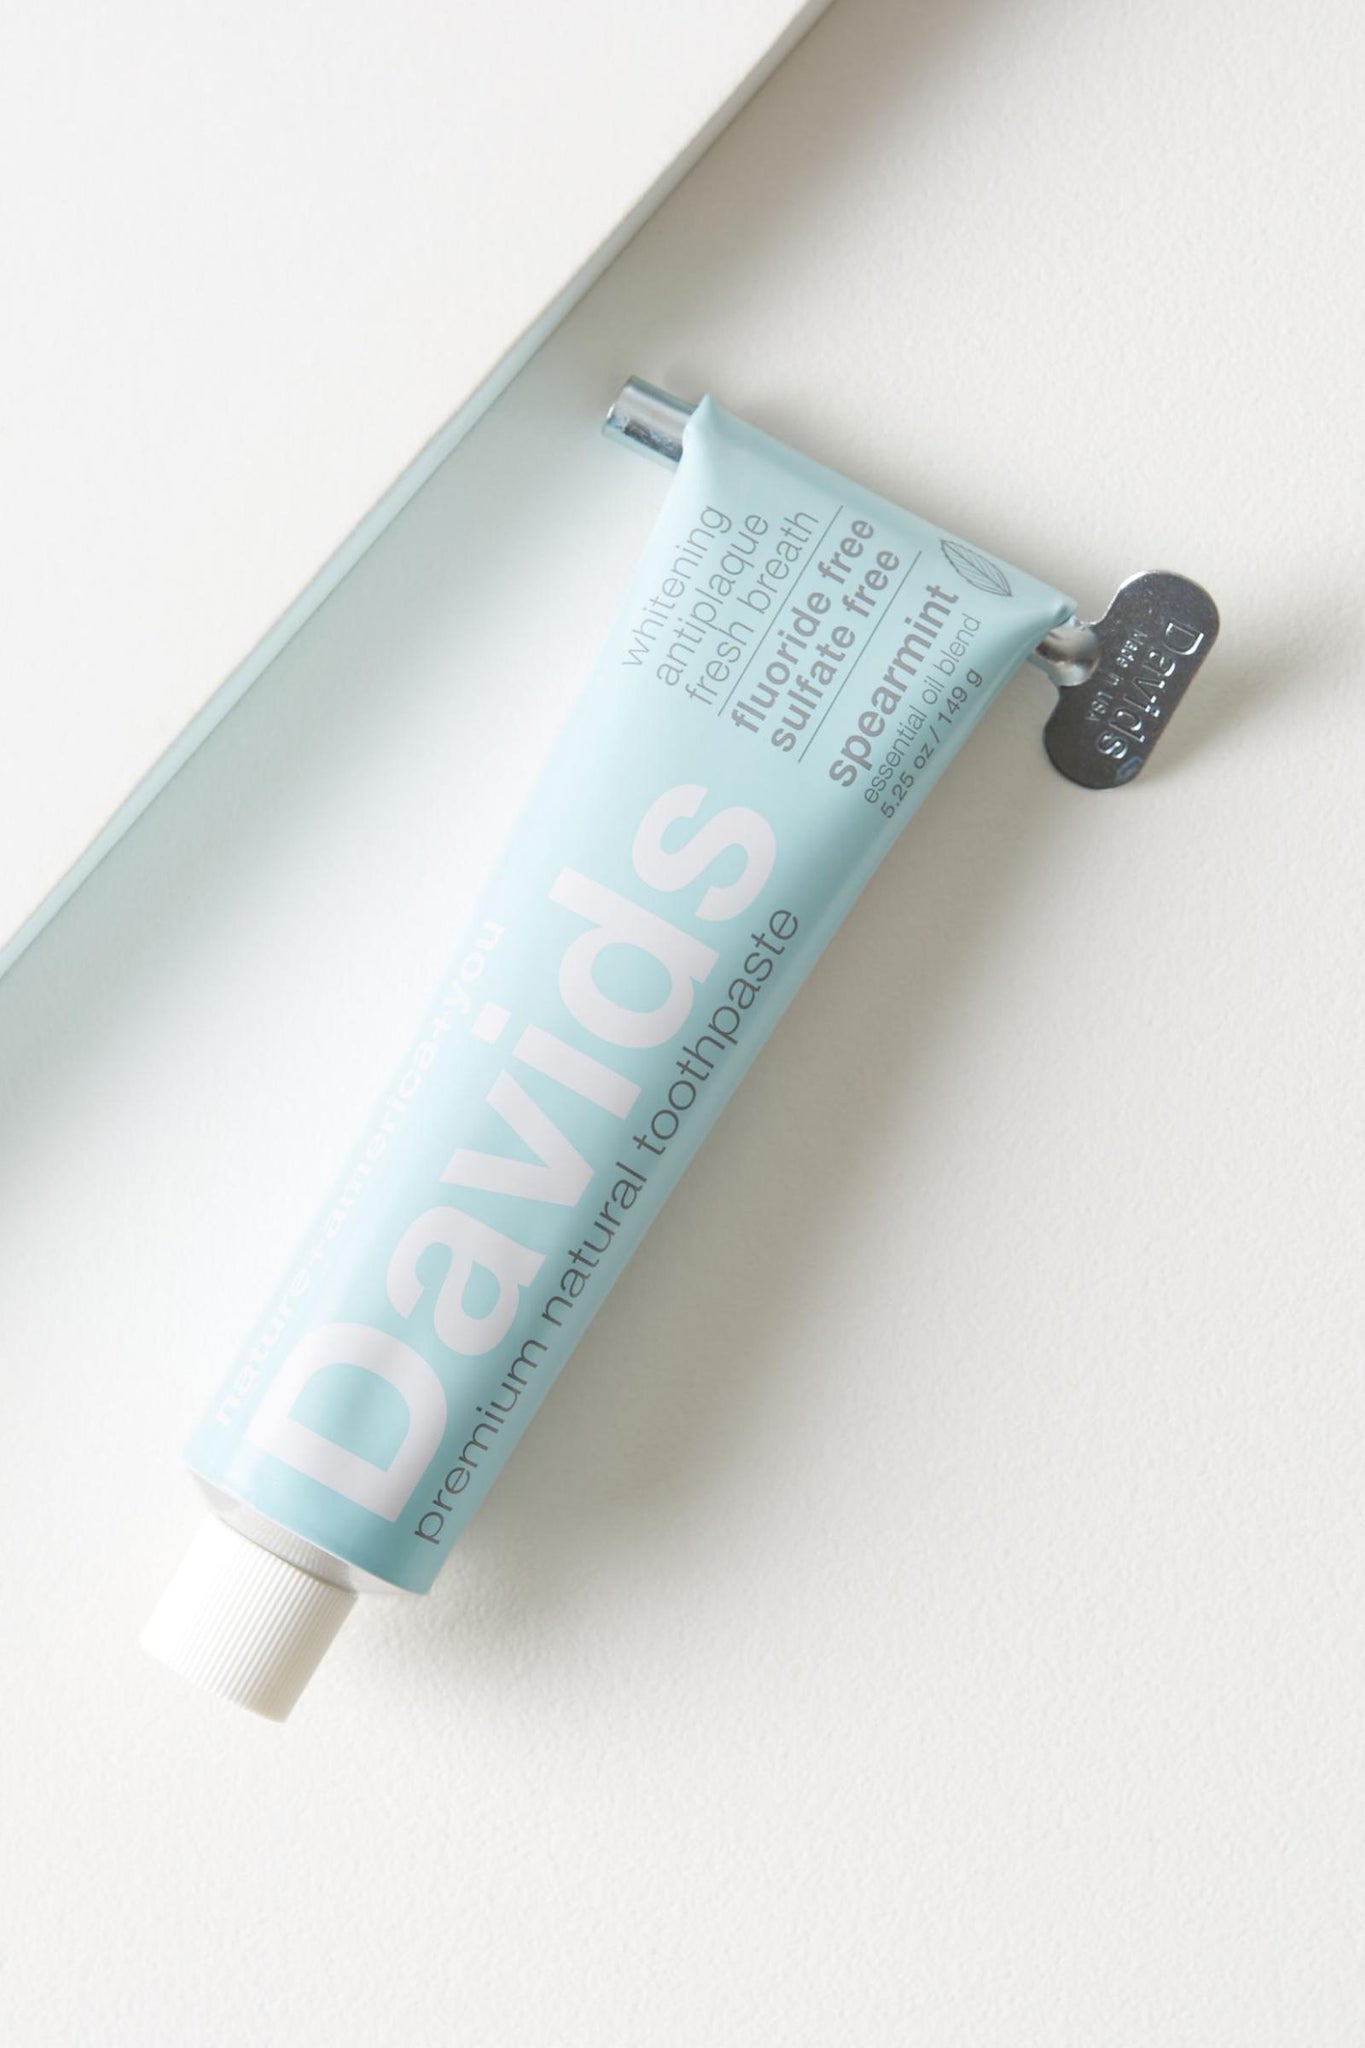 Davids - Premium Natural Spearmint Toothpaste Vegan Cruelty Free All Things Being Eco